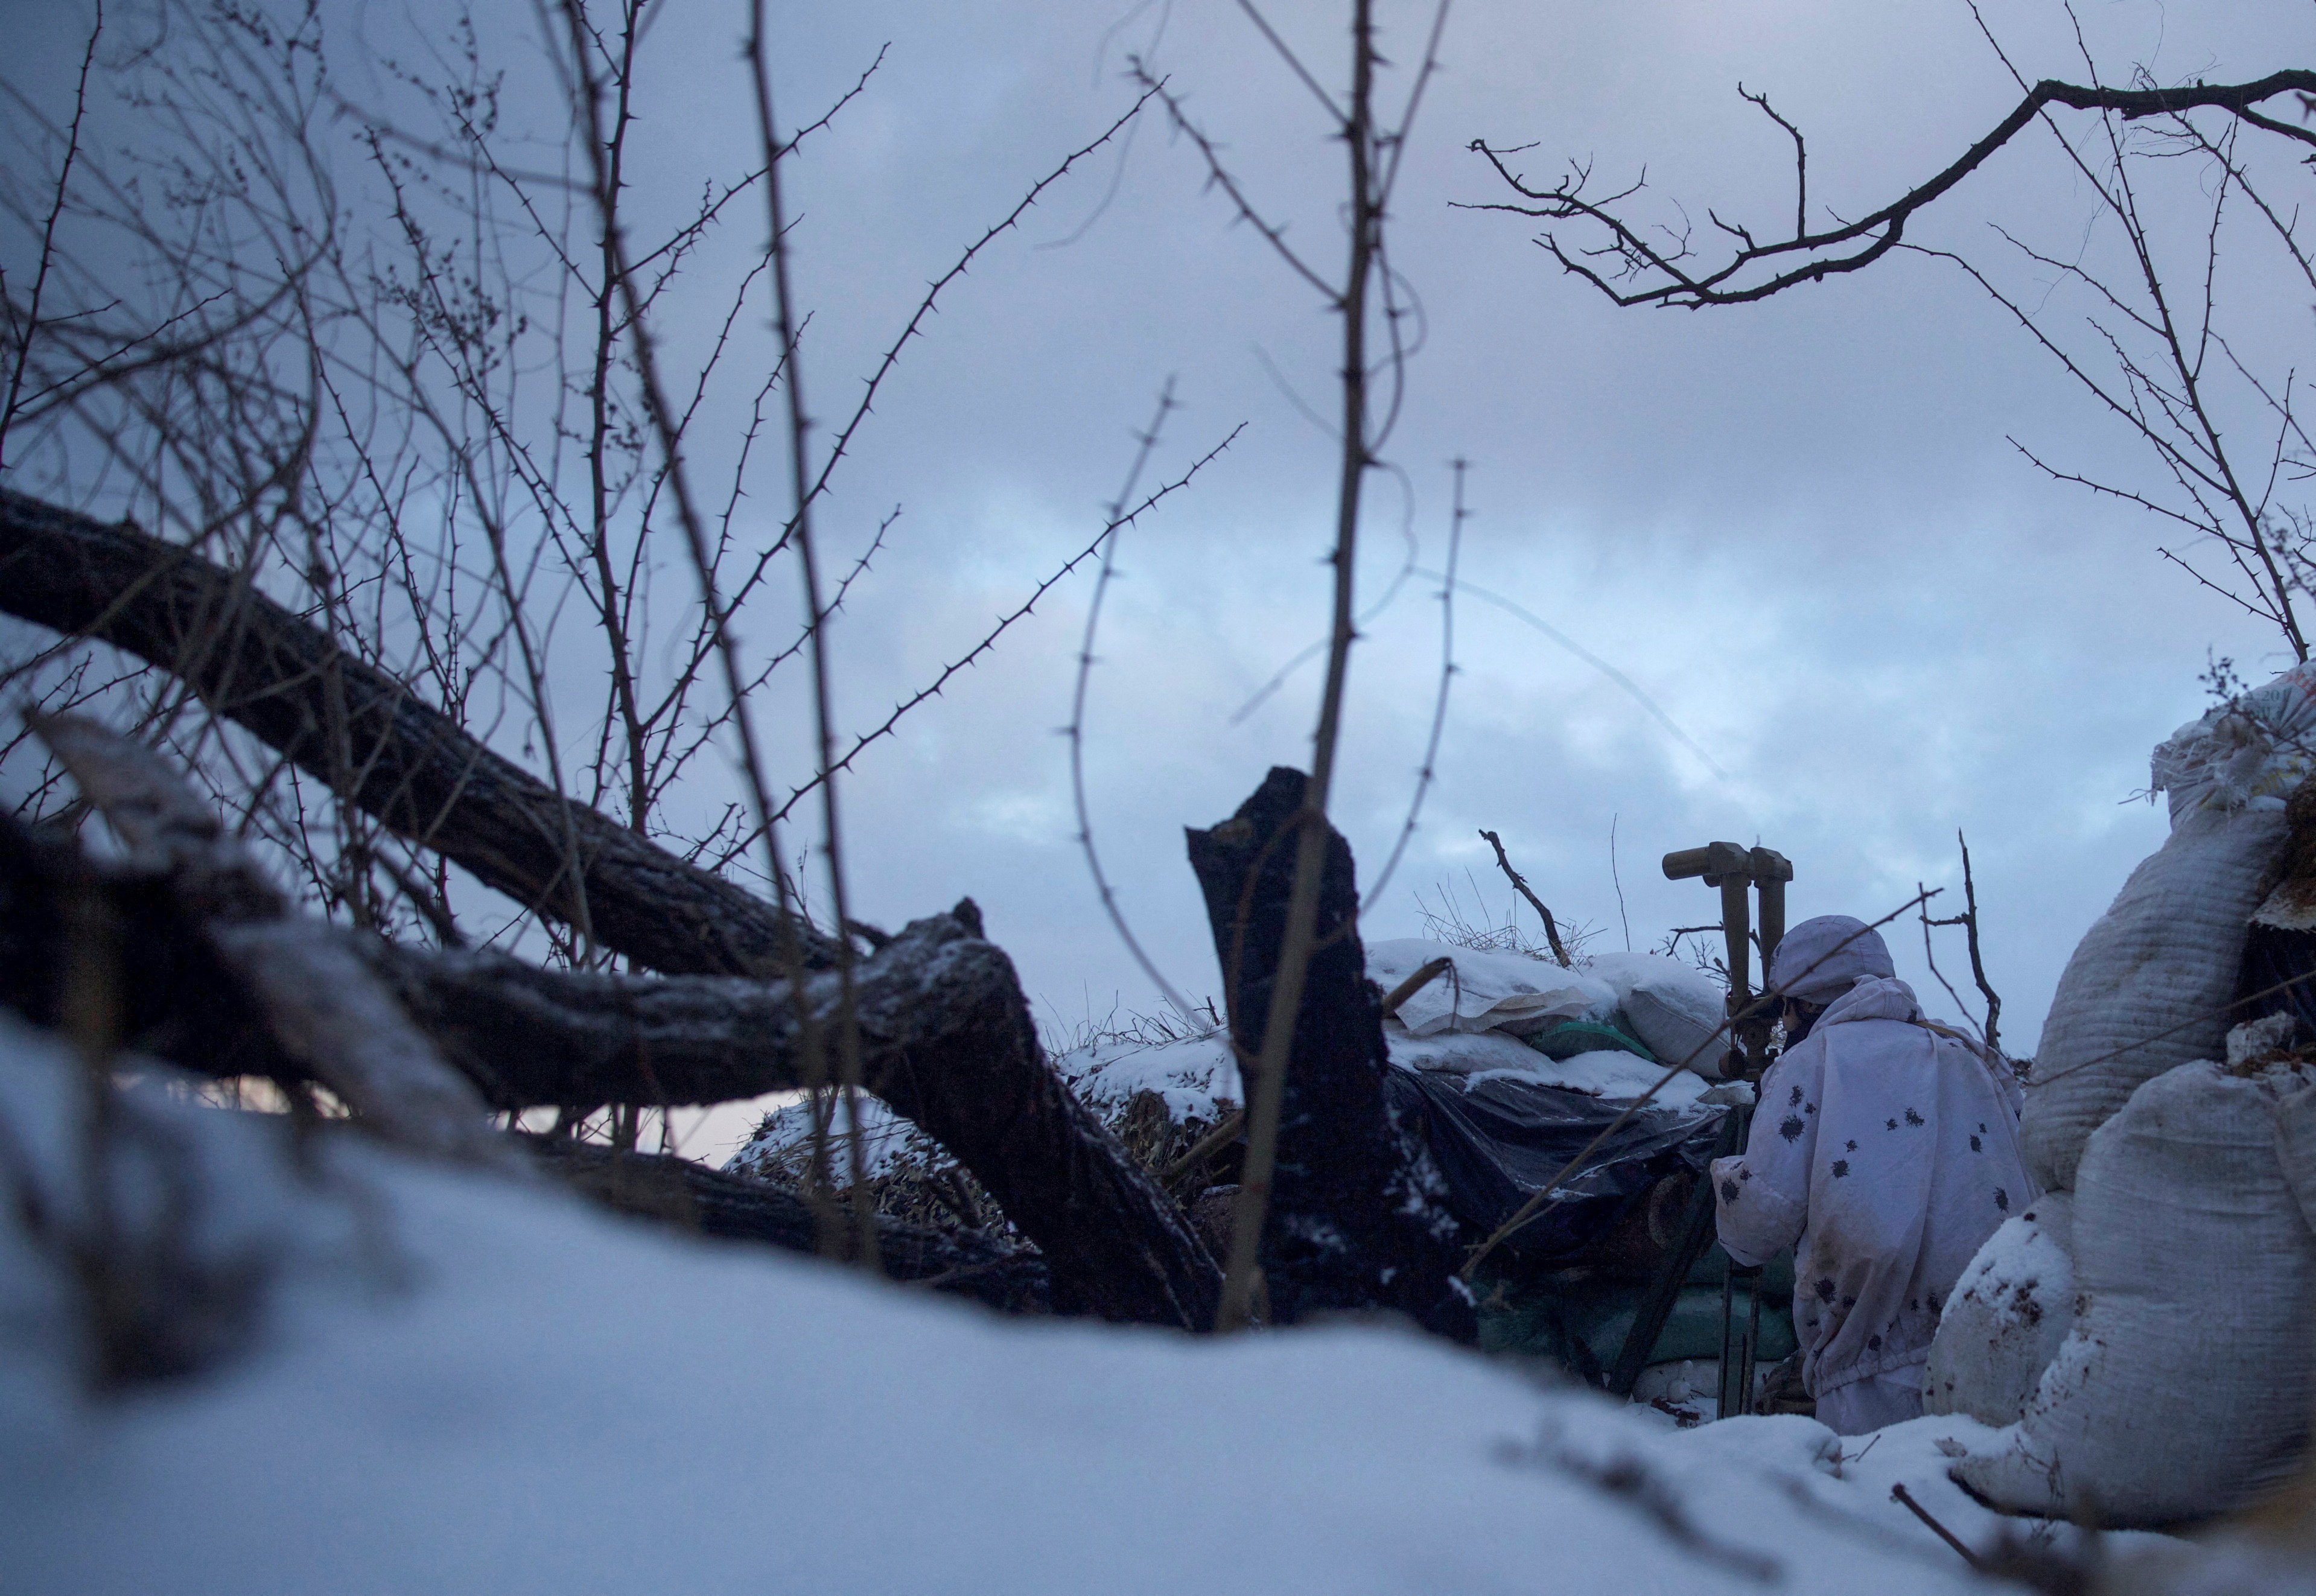 A service member of the Ukrainian armed forces observes the area at combat positions in the Donetsk region